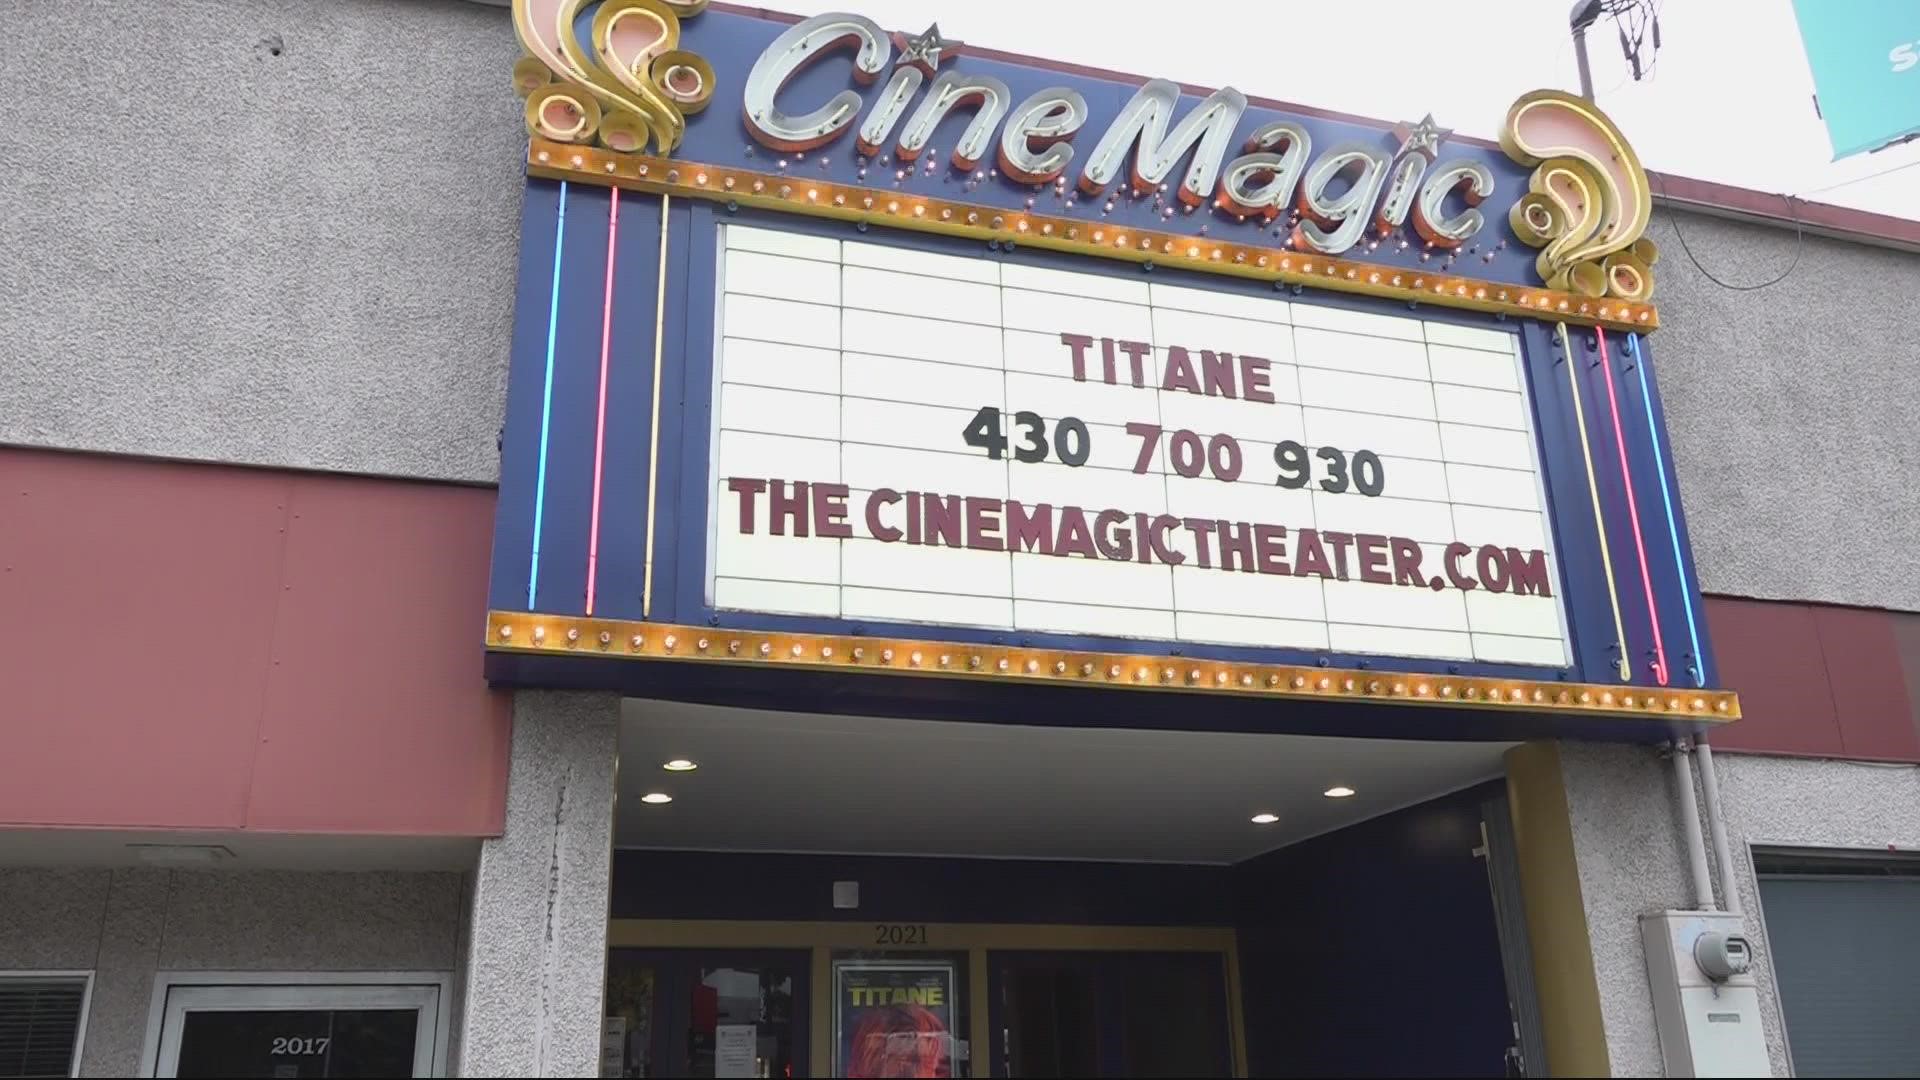 CineMagic will host a fundraiser on Sunday, October 17 to benefit four Portland businesses that were destroyed in a fire on Oct. 5.